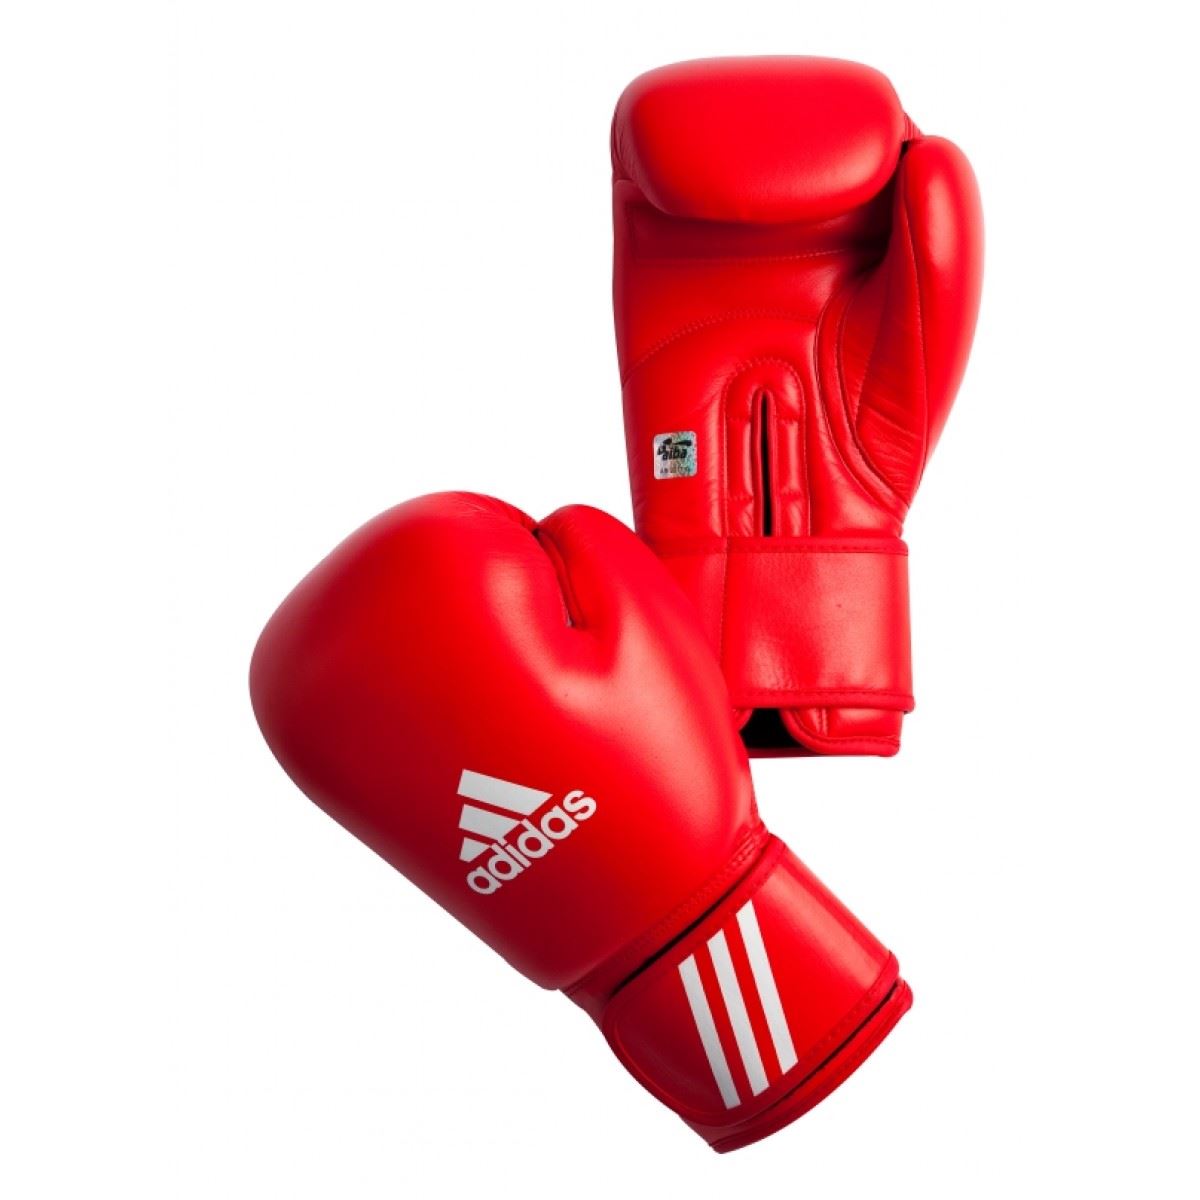 Adidas AIBA Approved Boxing Gloves 10 